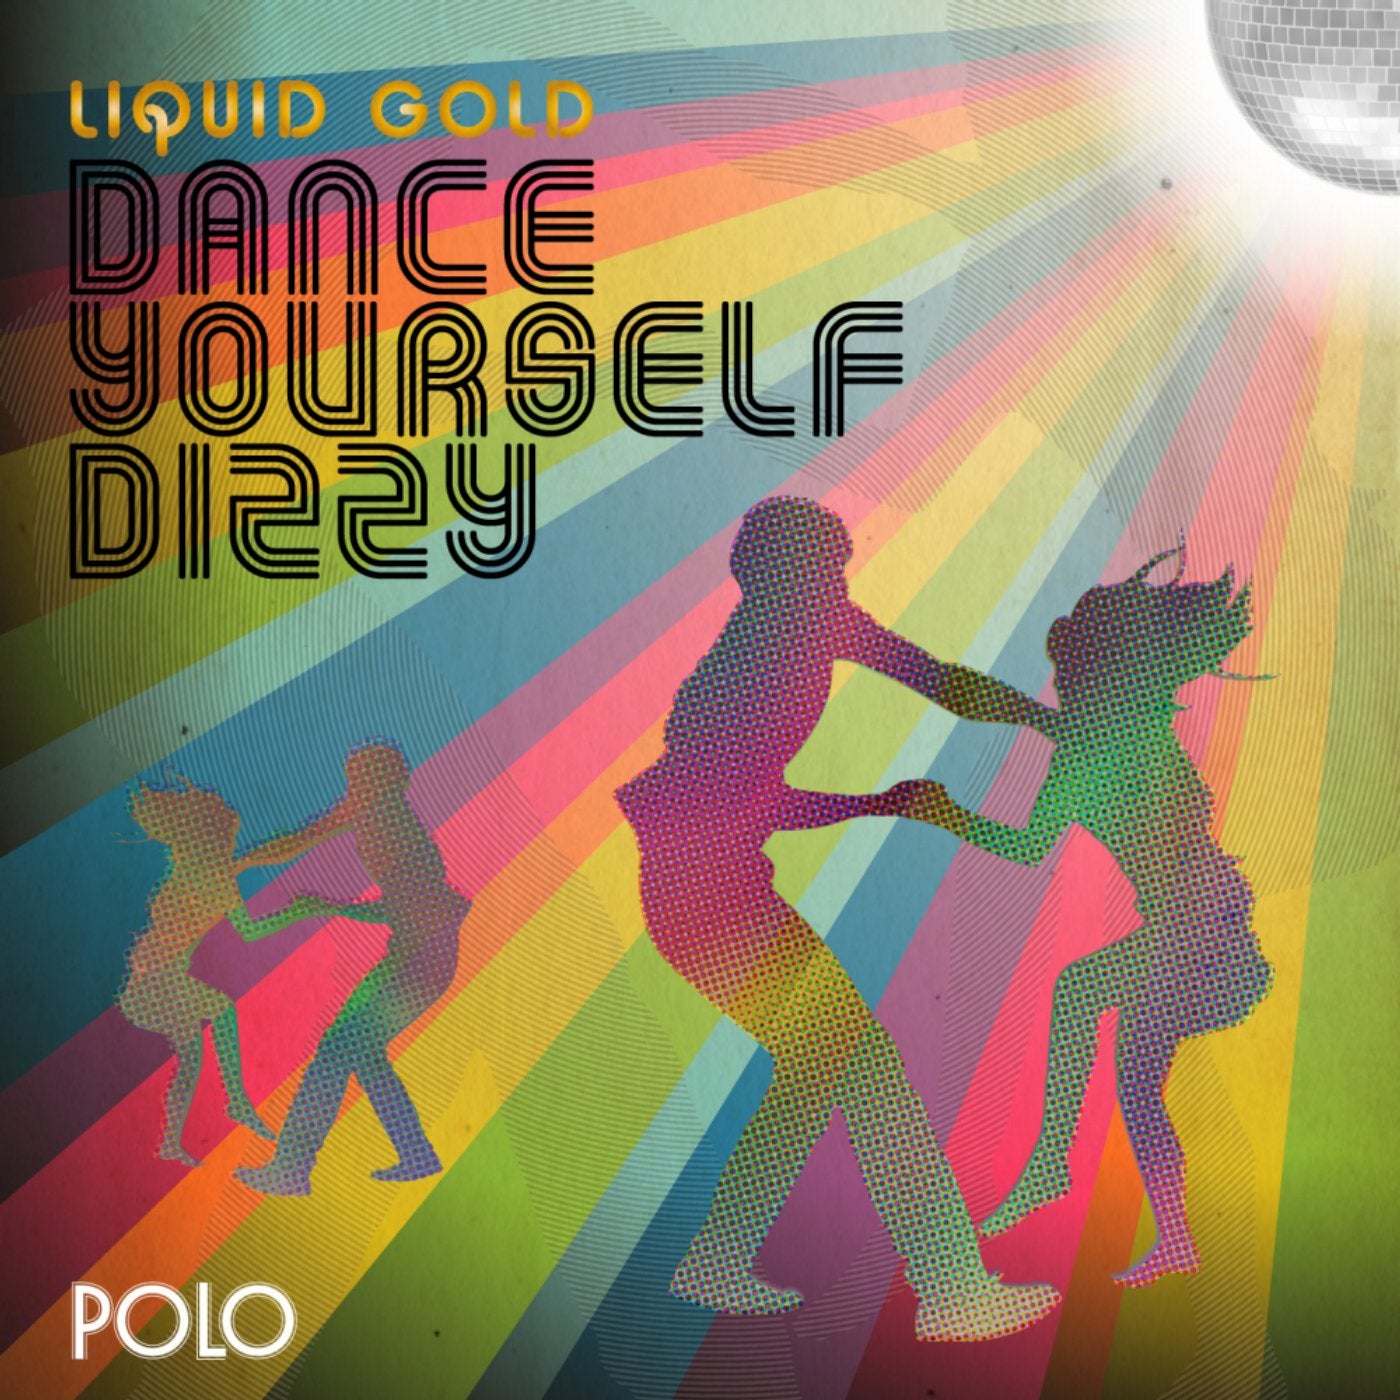 Dance Yourself Dizzy (Club Mix) by Liquid Gold on Beatport